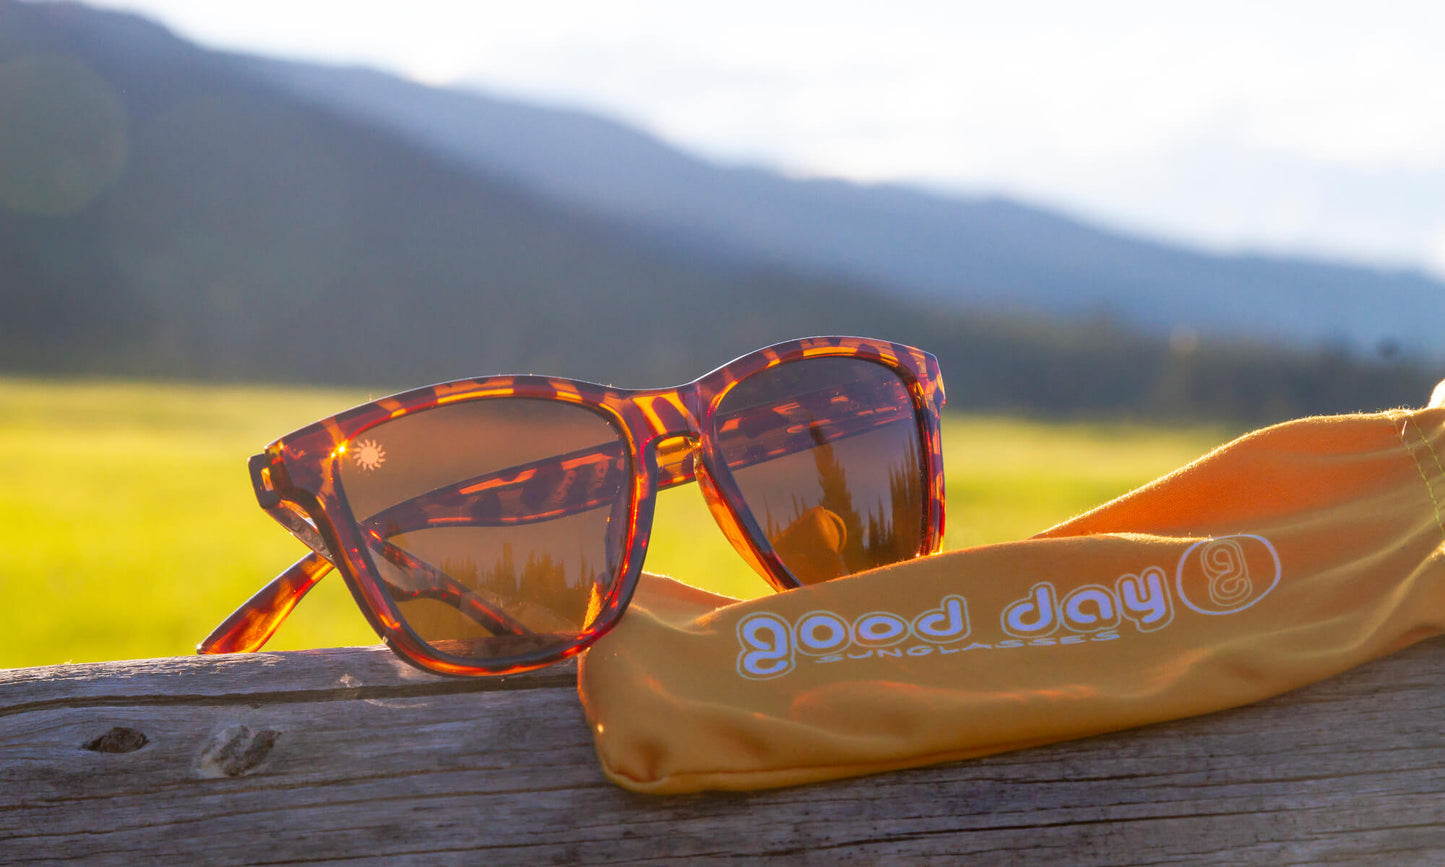 Good Day Sunglasses Tortoise Shell Sunshines--camping lifestyle view